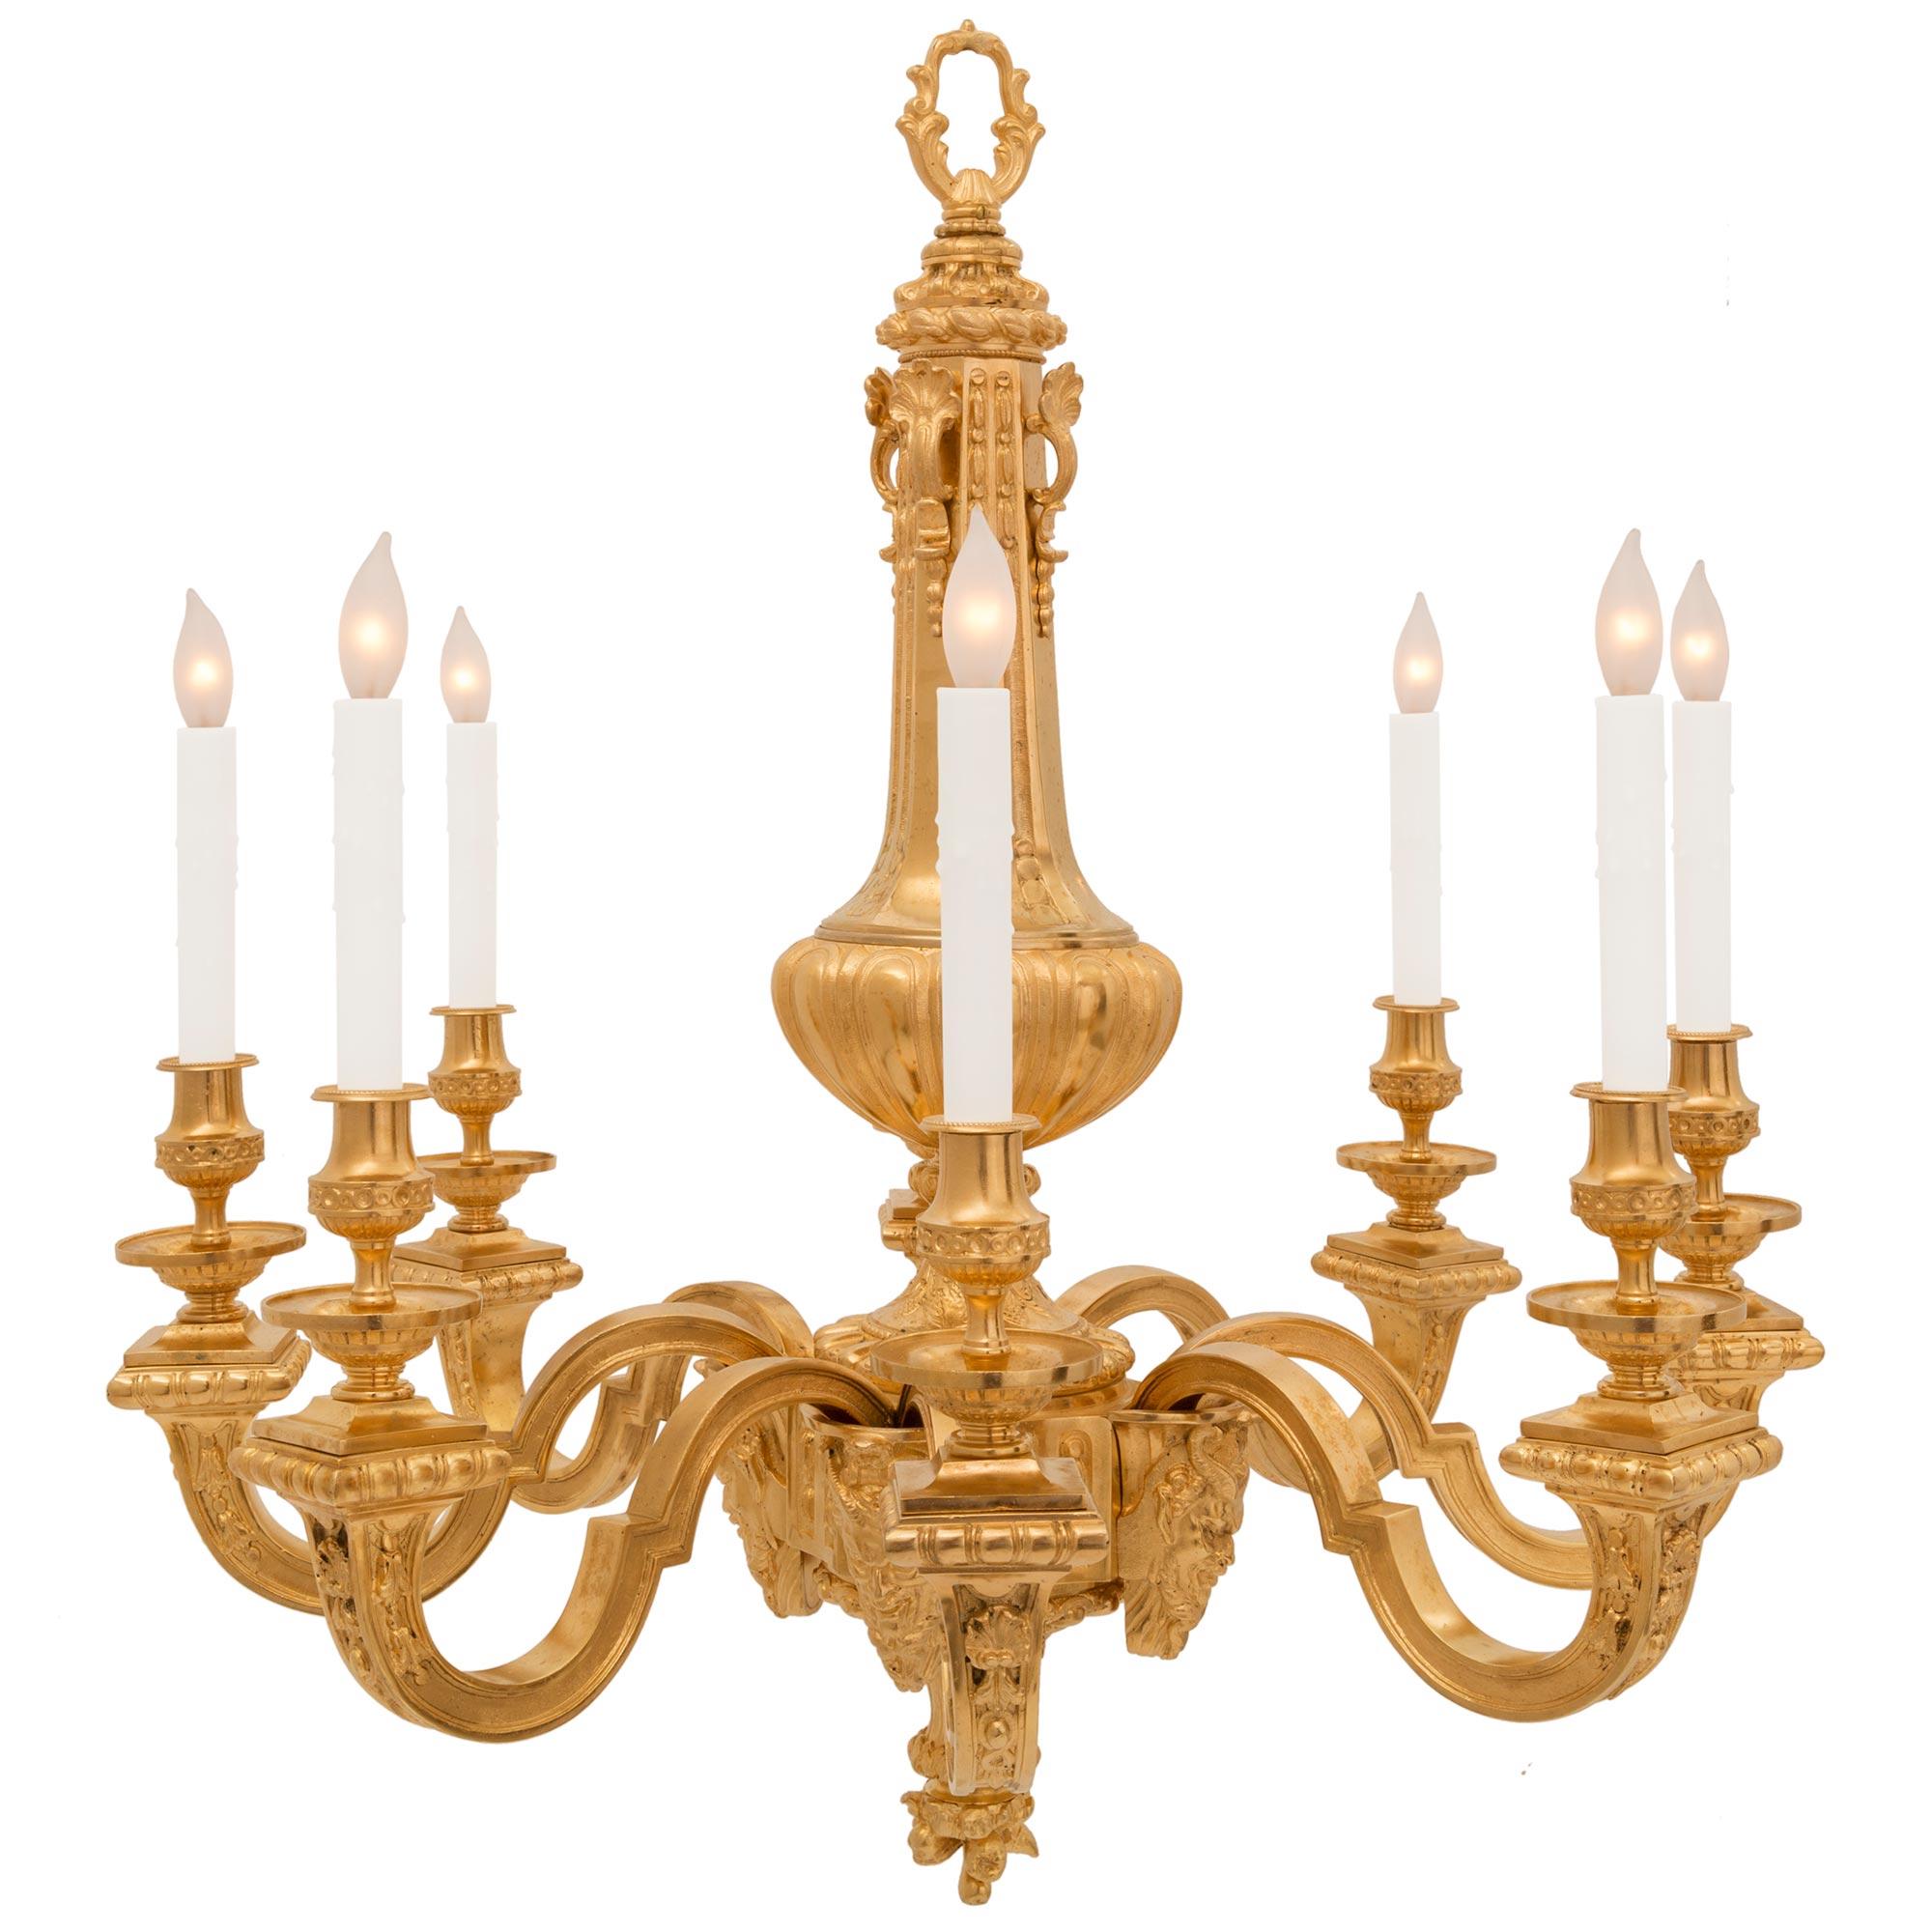 An exceptional French 19th century Louis XVI st. ormolu chandelier. The eight arm chandelier is centered by a beautiful richly chased bottom floral finial below the elegantly curved support with fine foliate details. The arms branch out from